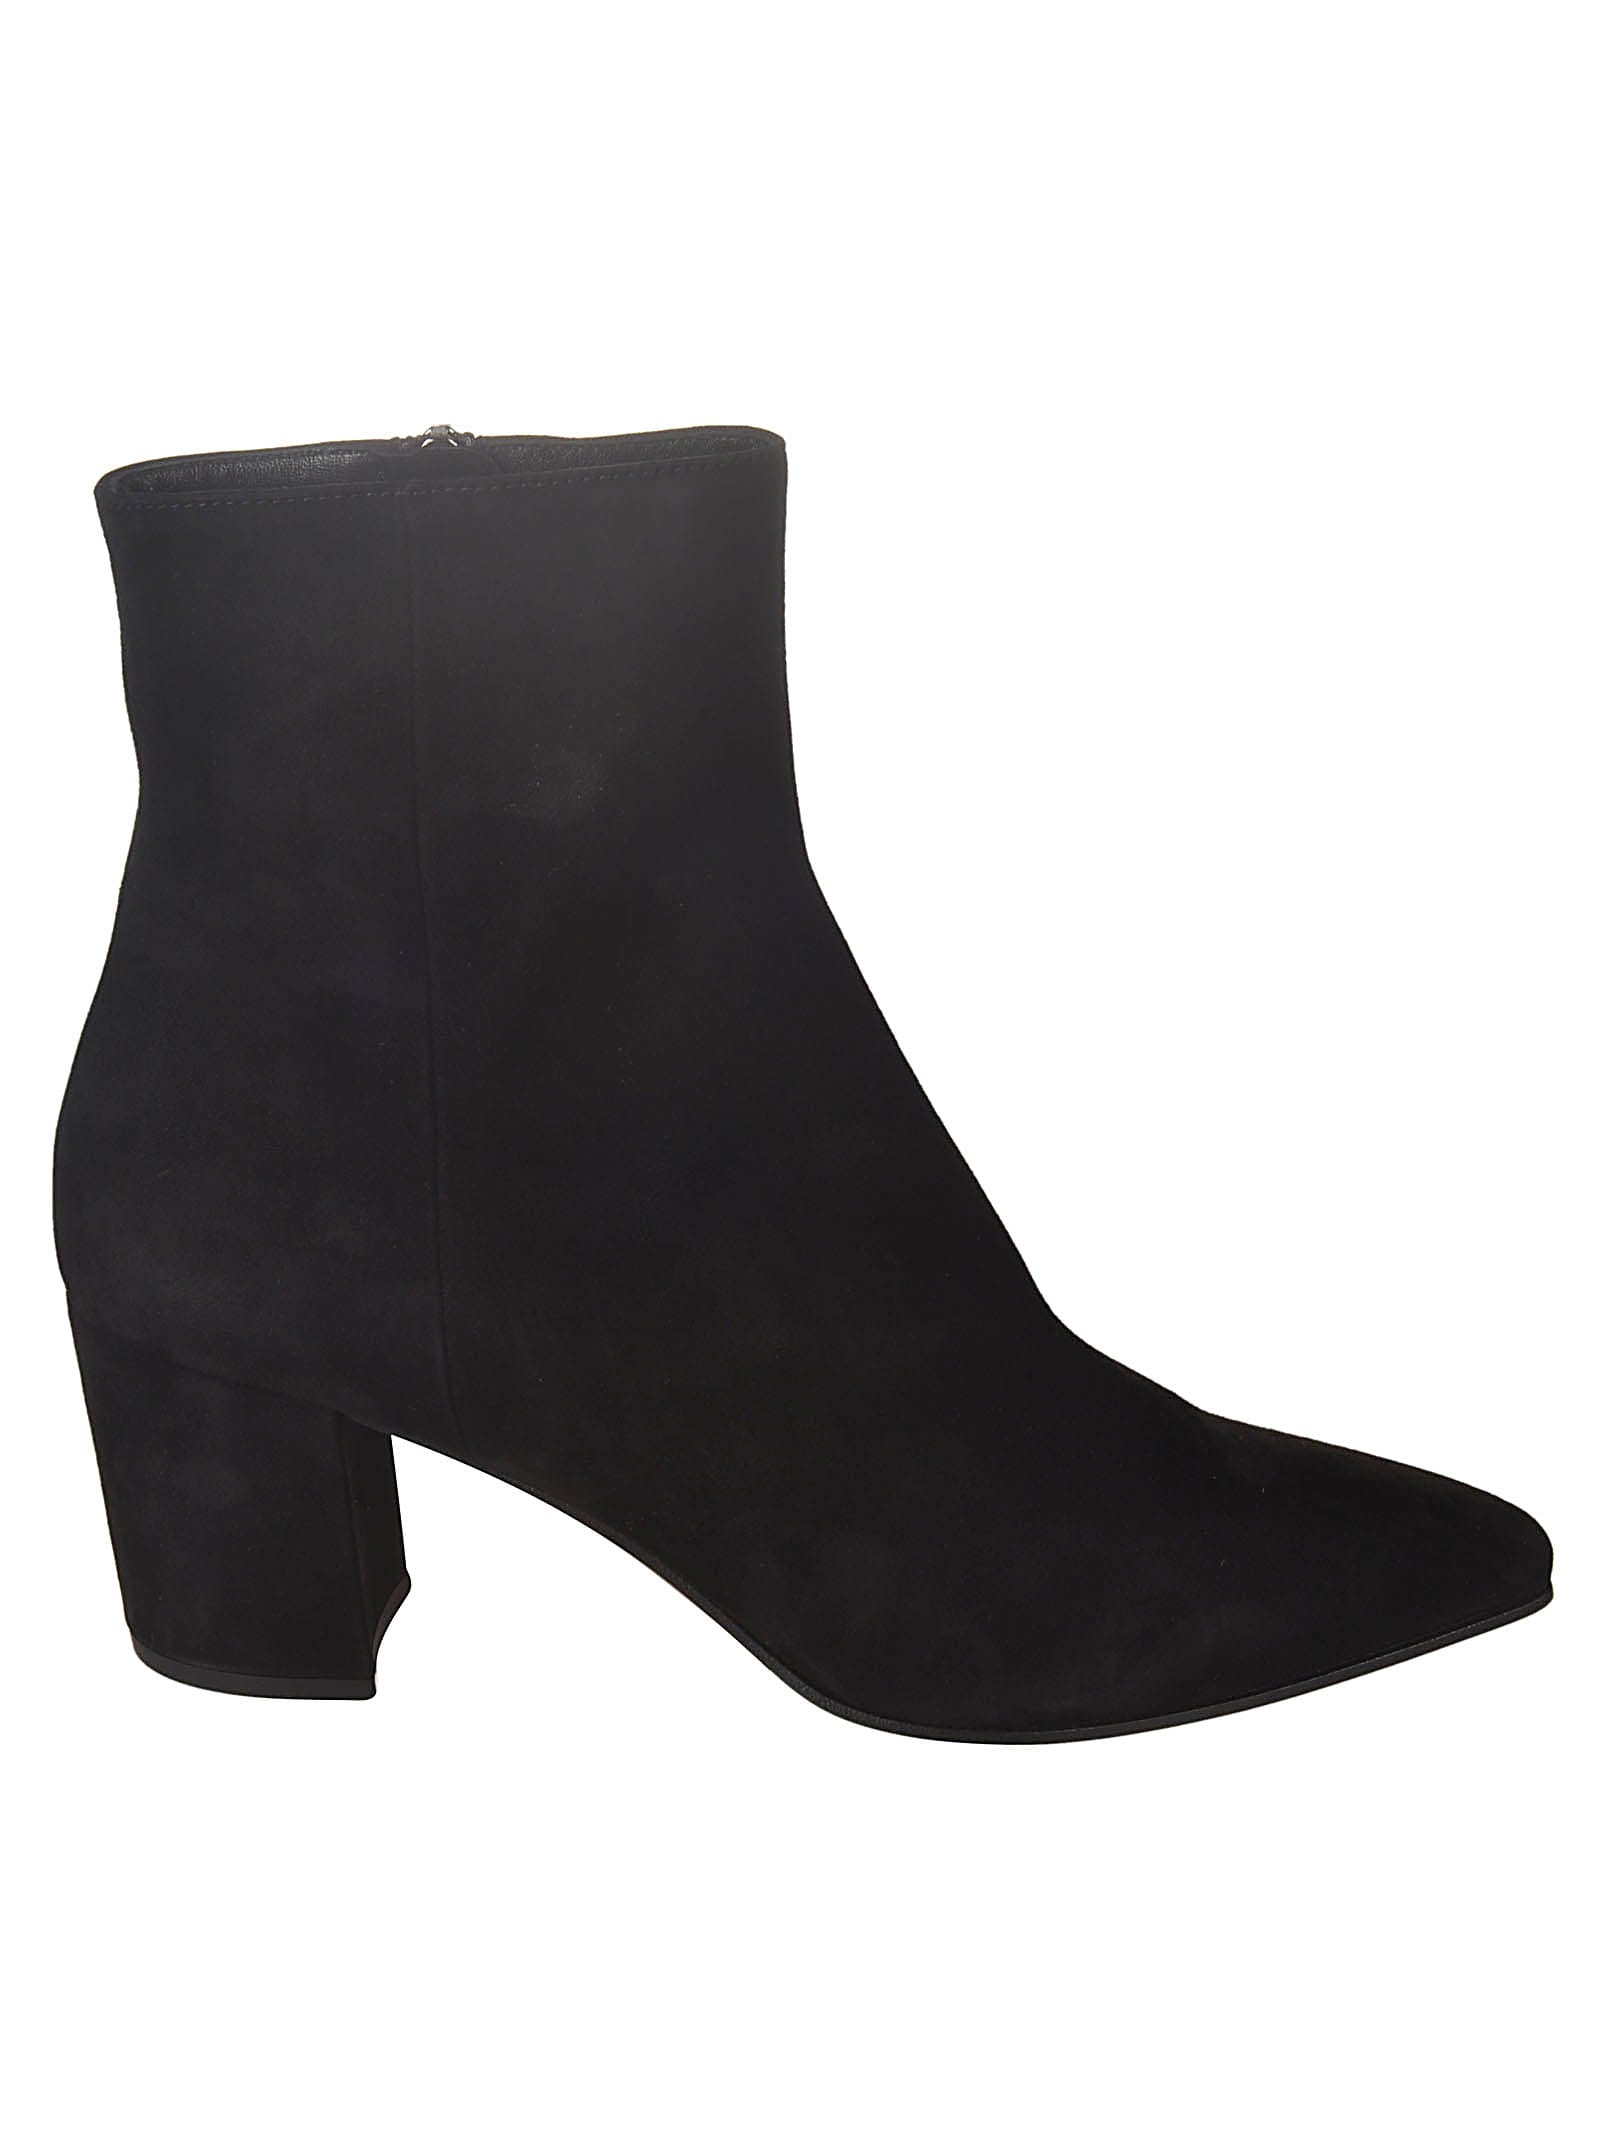 Buy Prada Side-zipped Ankle Boots online, shop Prada shoes with free shipping